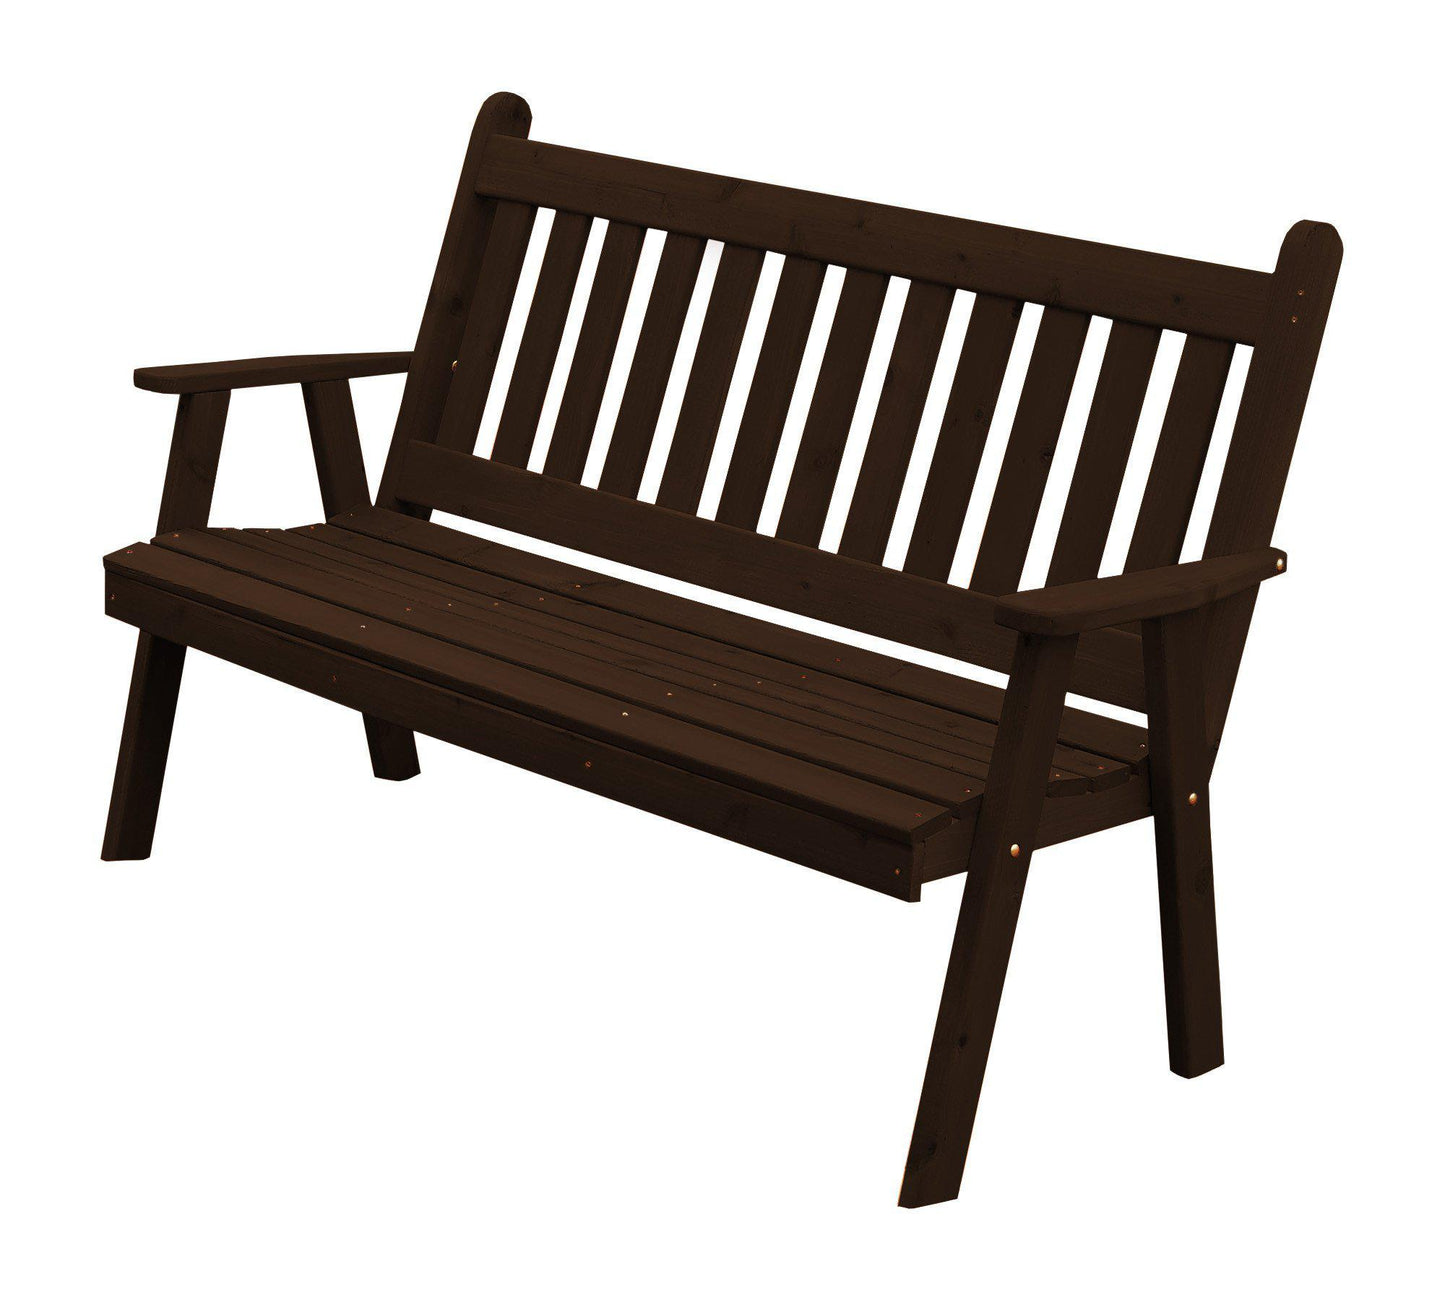 Regallion Outdoor Western Red Cedar 5' Traditional English Garden Bench - LEAD TIME TO SHIP 2 WEEKS